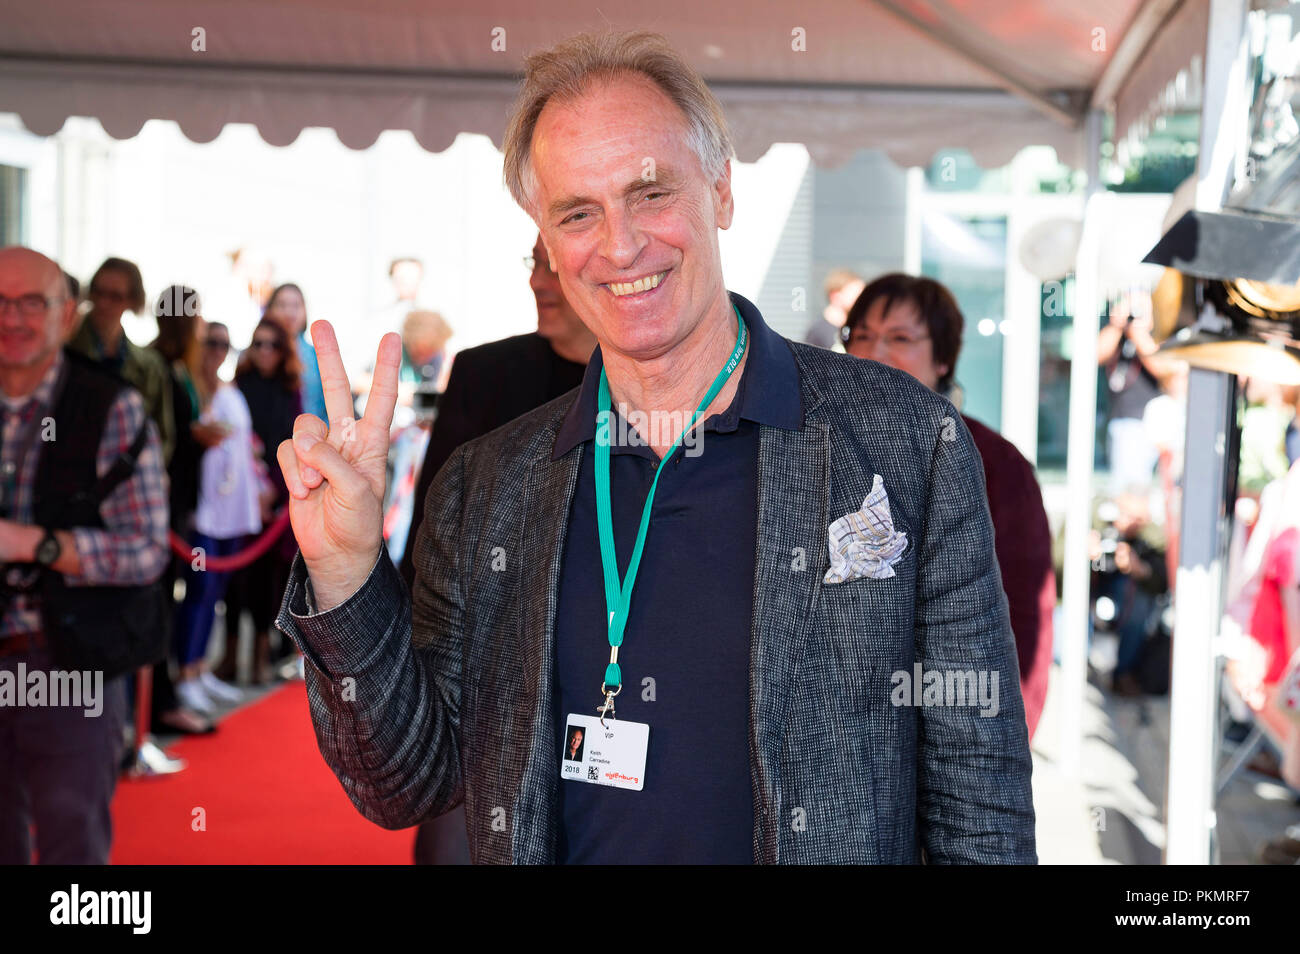 Keith Carradine is honored with a star on the OLB Walk of Fame during the Filmfest Oldenburg on September 14, 2018 in Oldenburg, Germany. Stock Photo